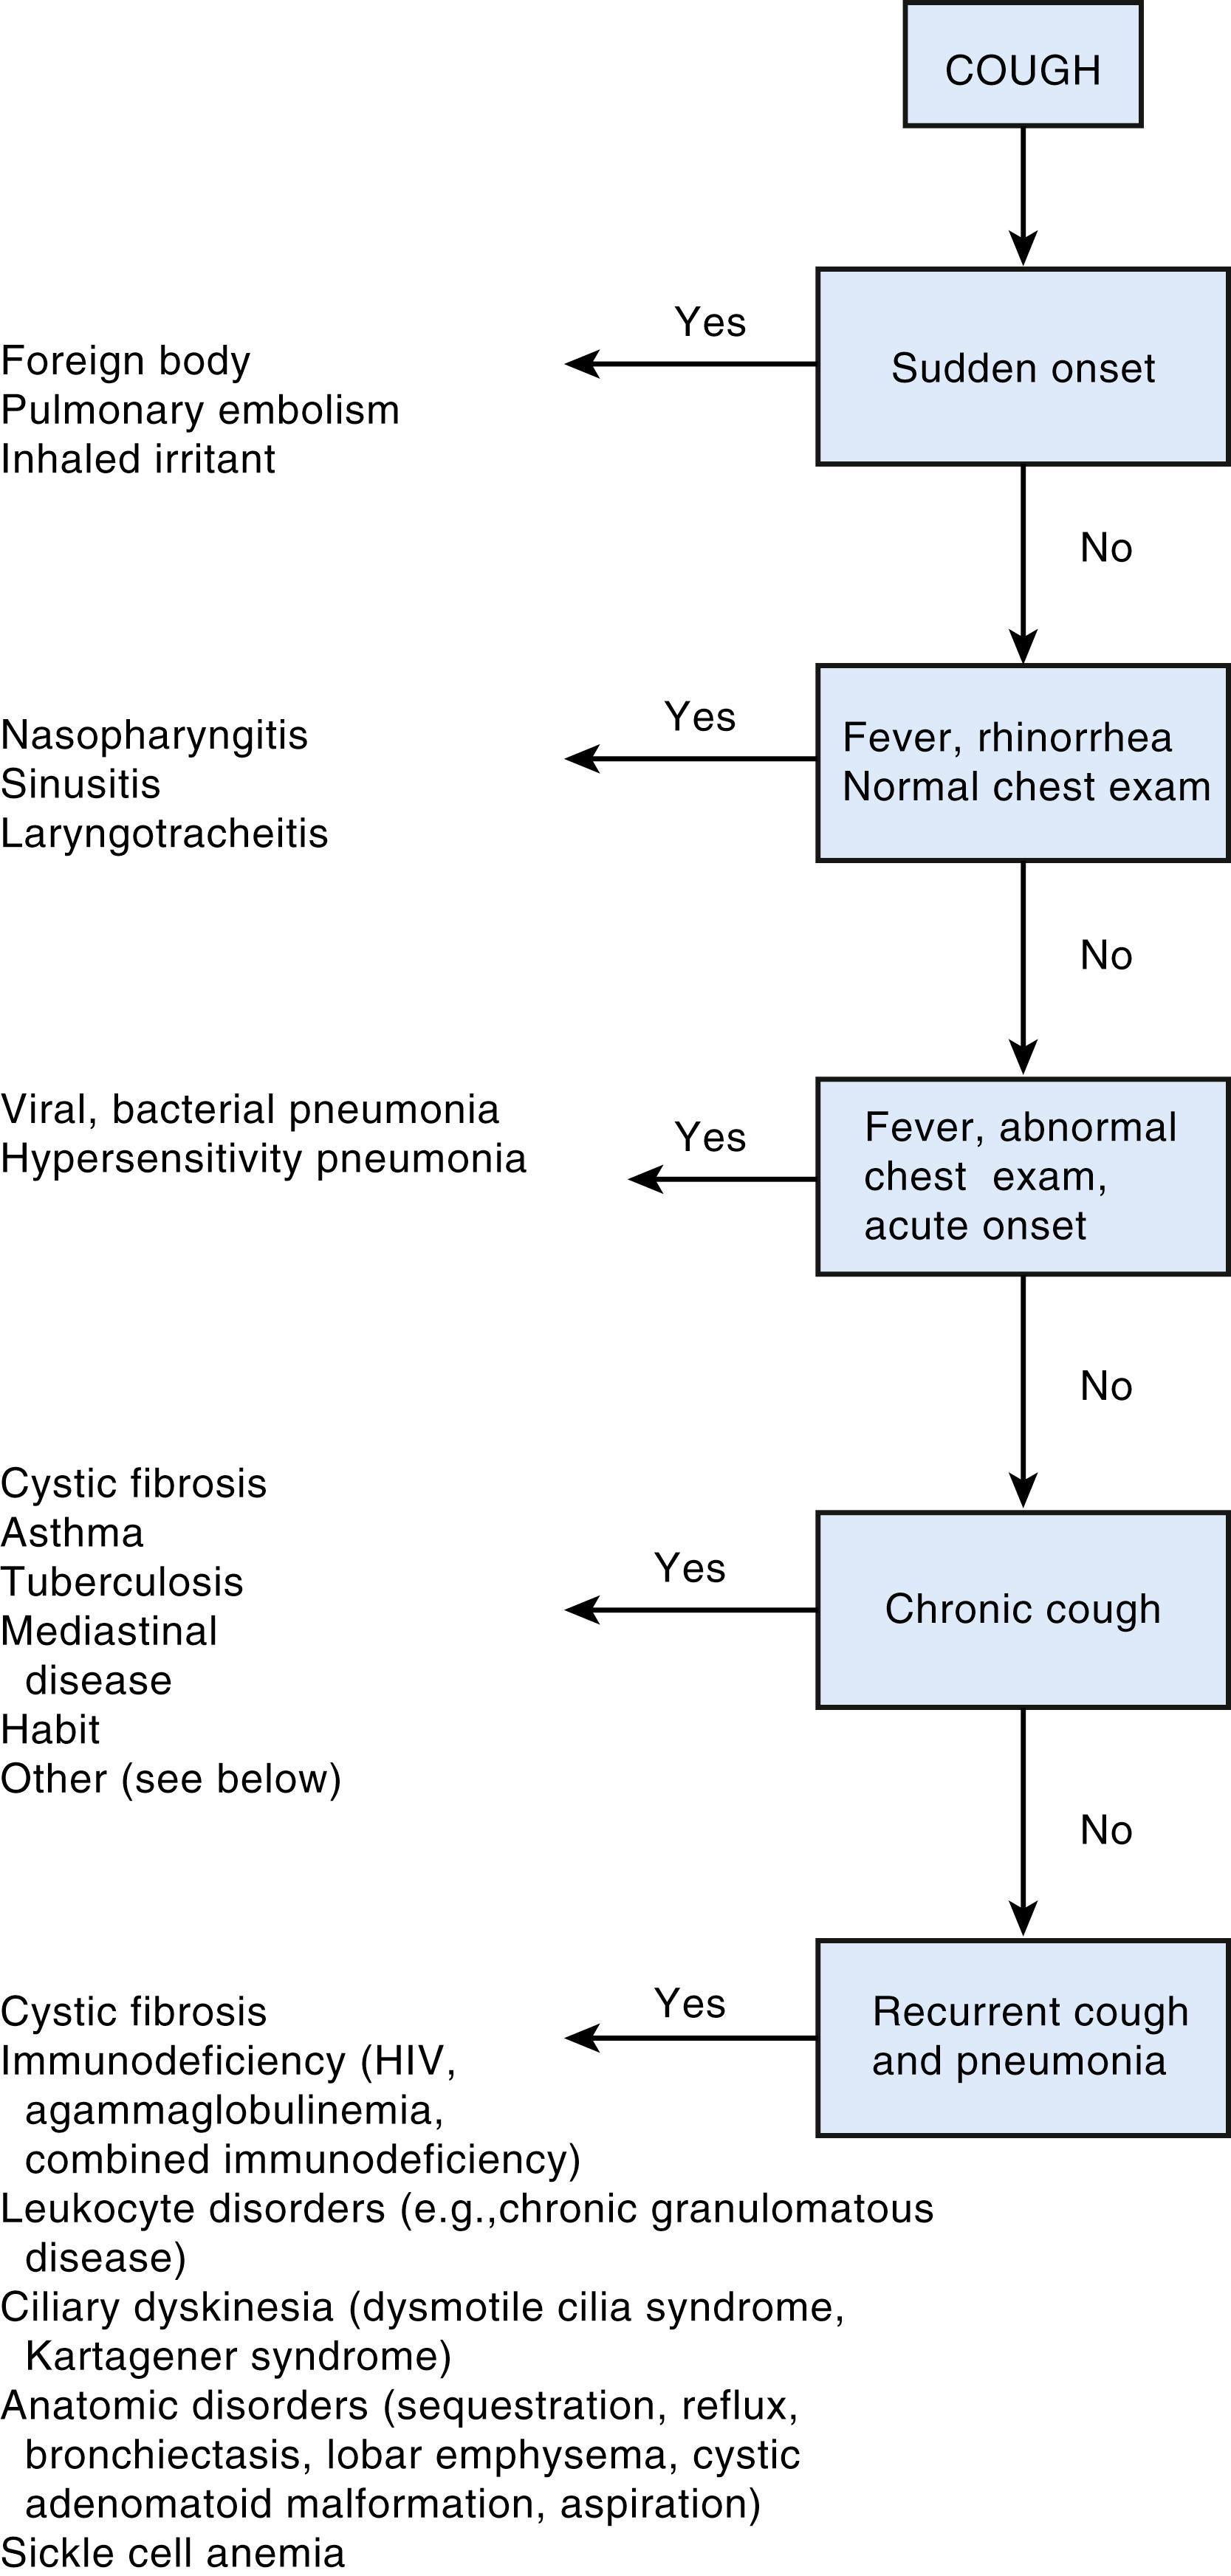 Fig. 3.2, Algorithm for differential diagnosis of cough.